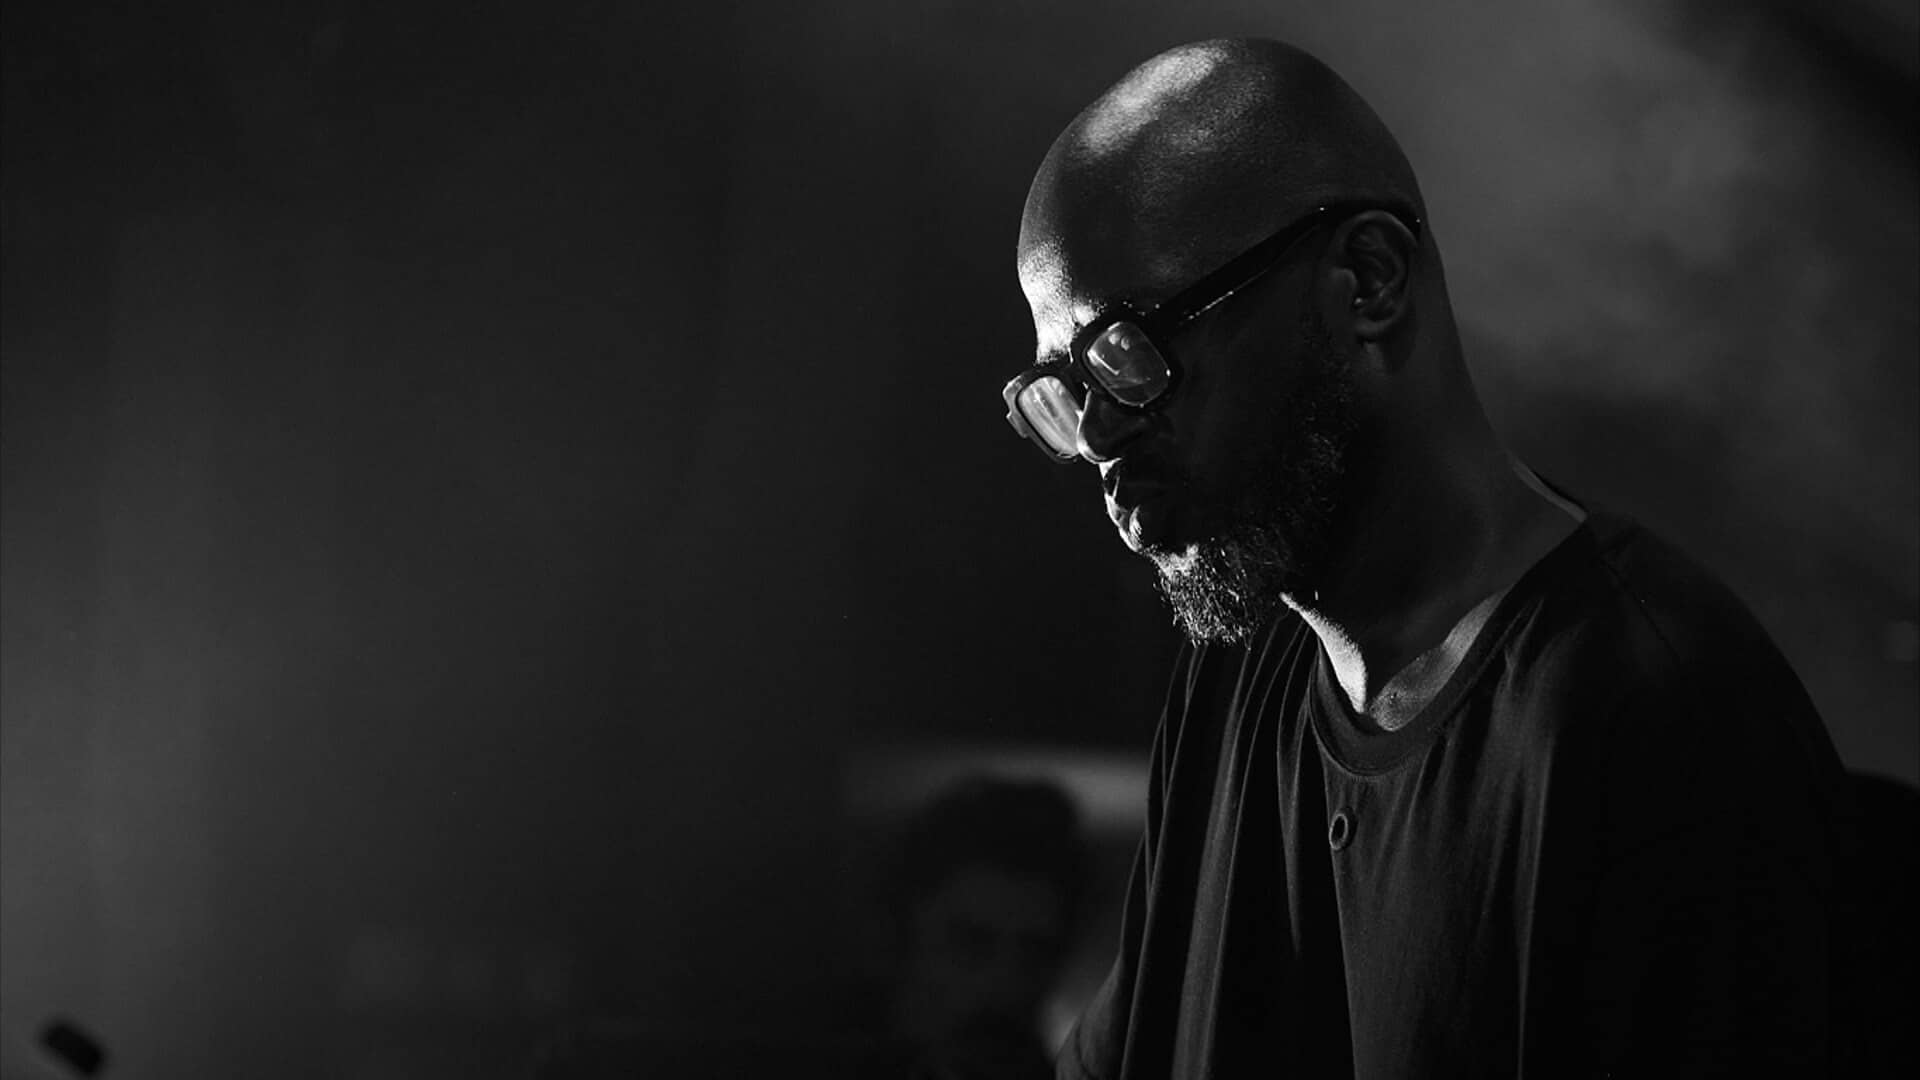 Black Coffee touches souls with his long-awaited album ‘Subconsciously’: Listen